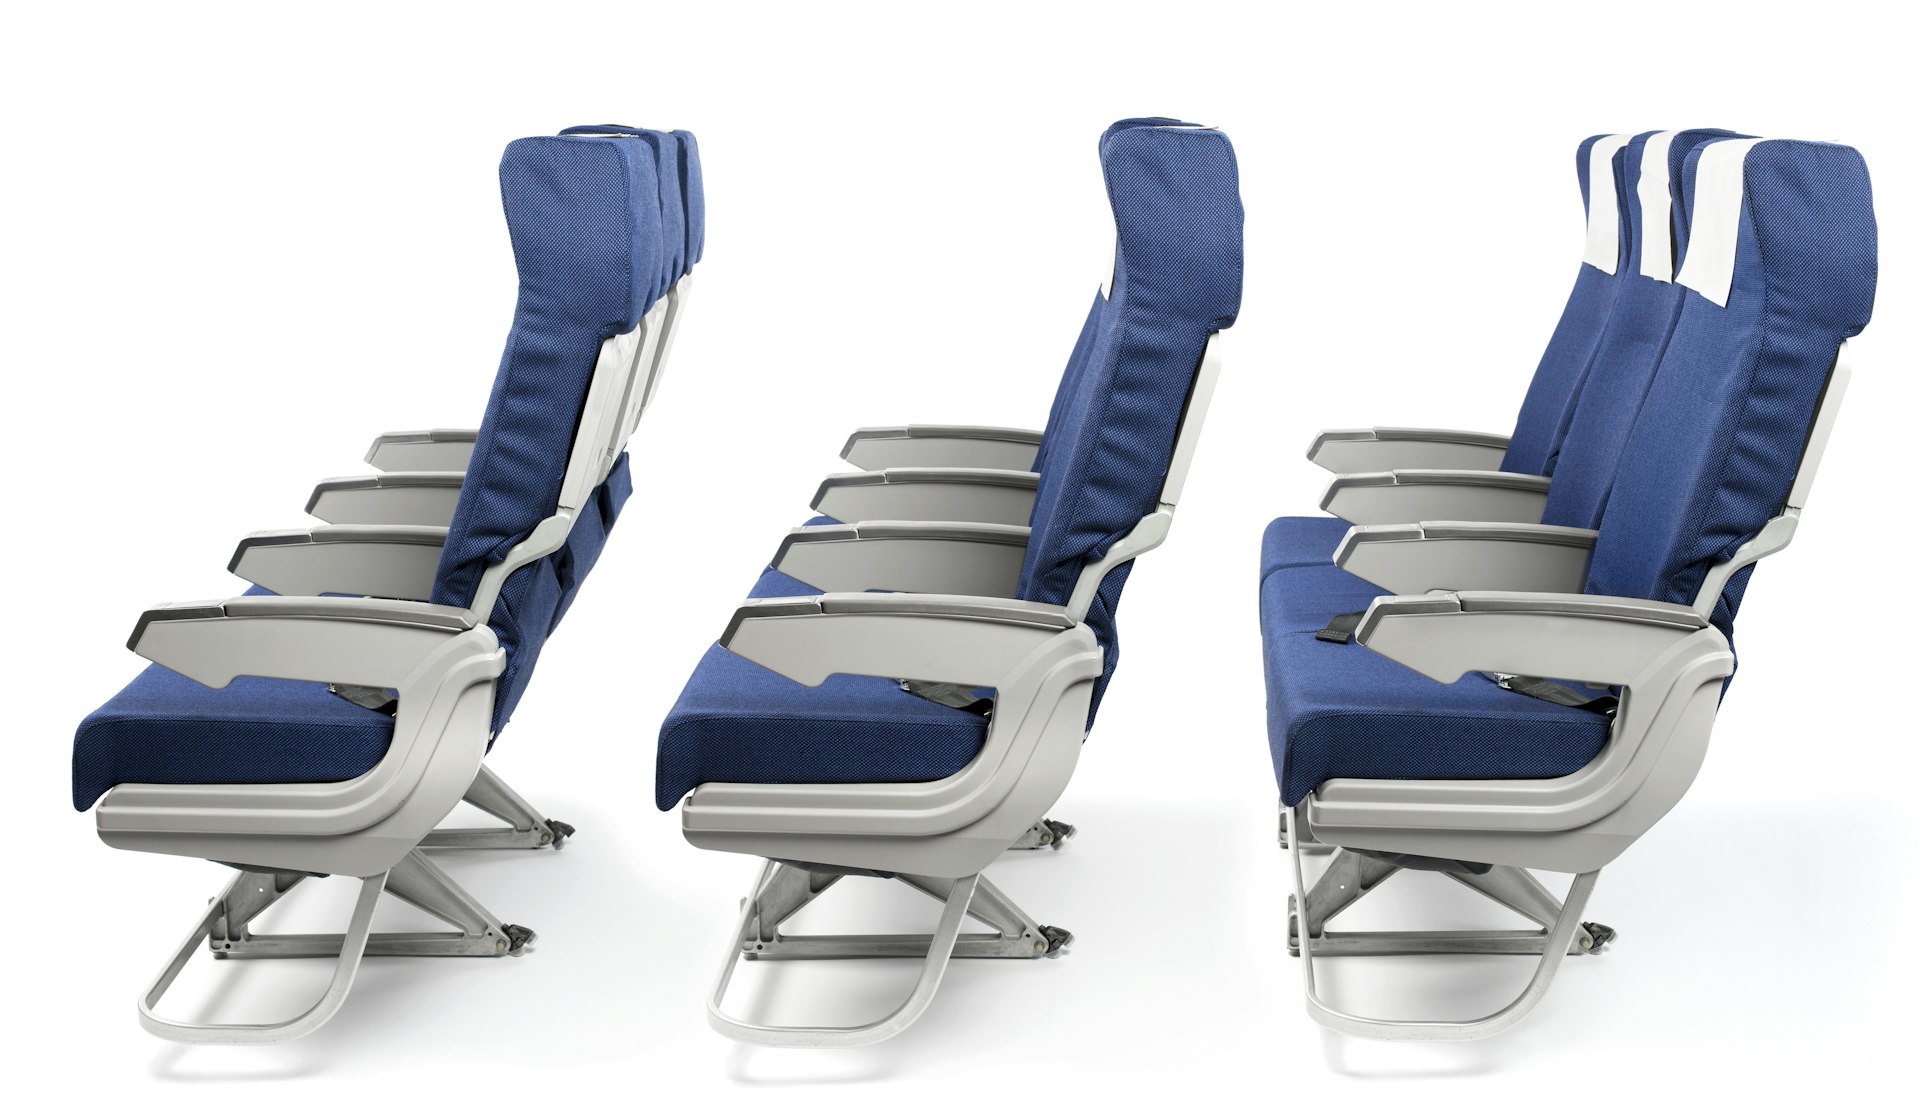 Three rows of blue airline seats over a white background. The seats have grey armrests and blue fabric elsewhere.